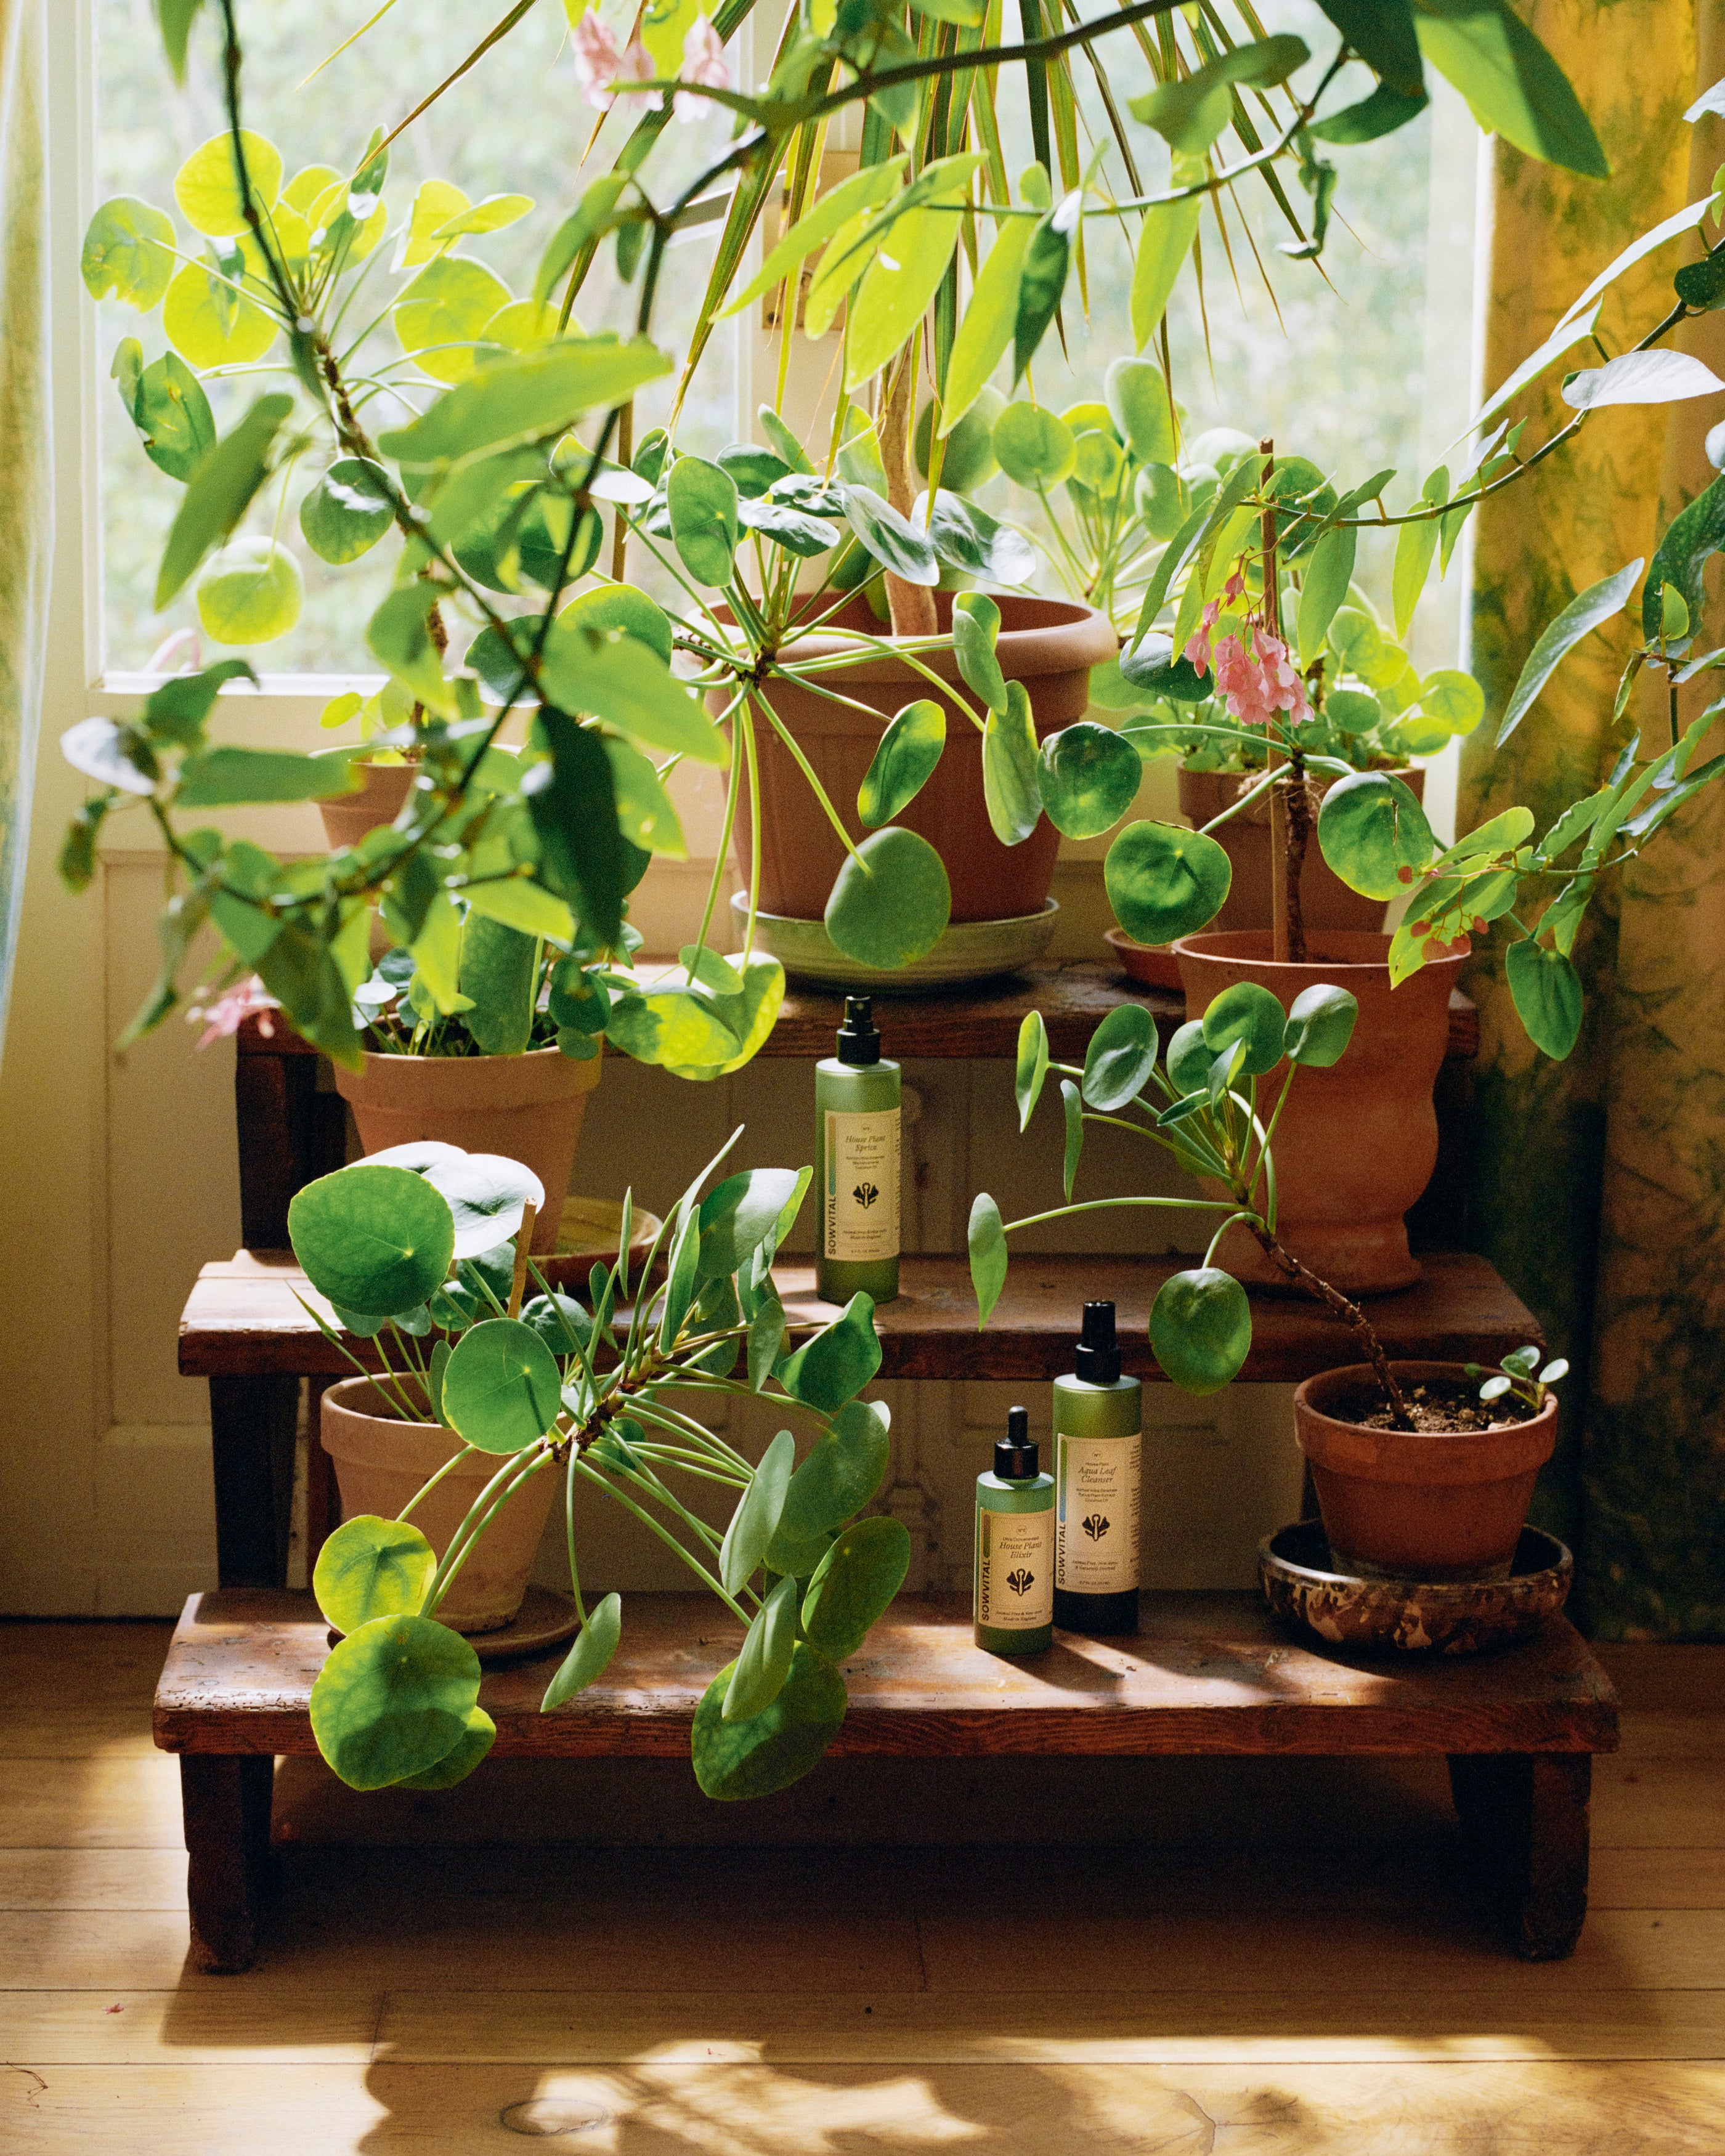 ‘Embracing houseplants is like painting your space with life’